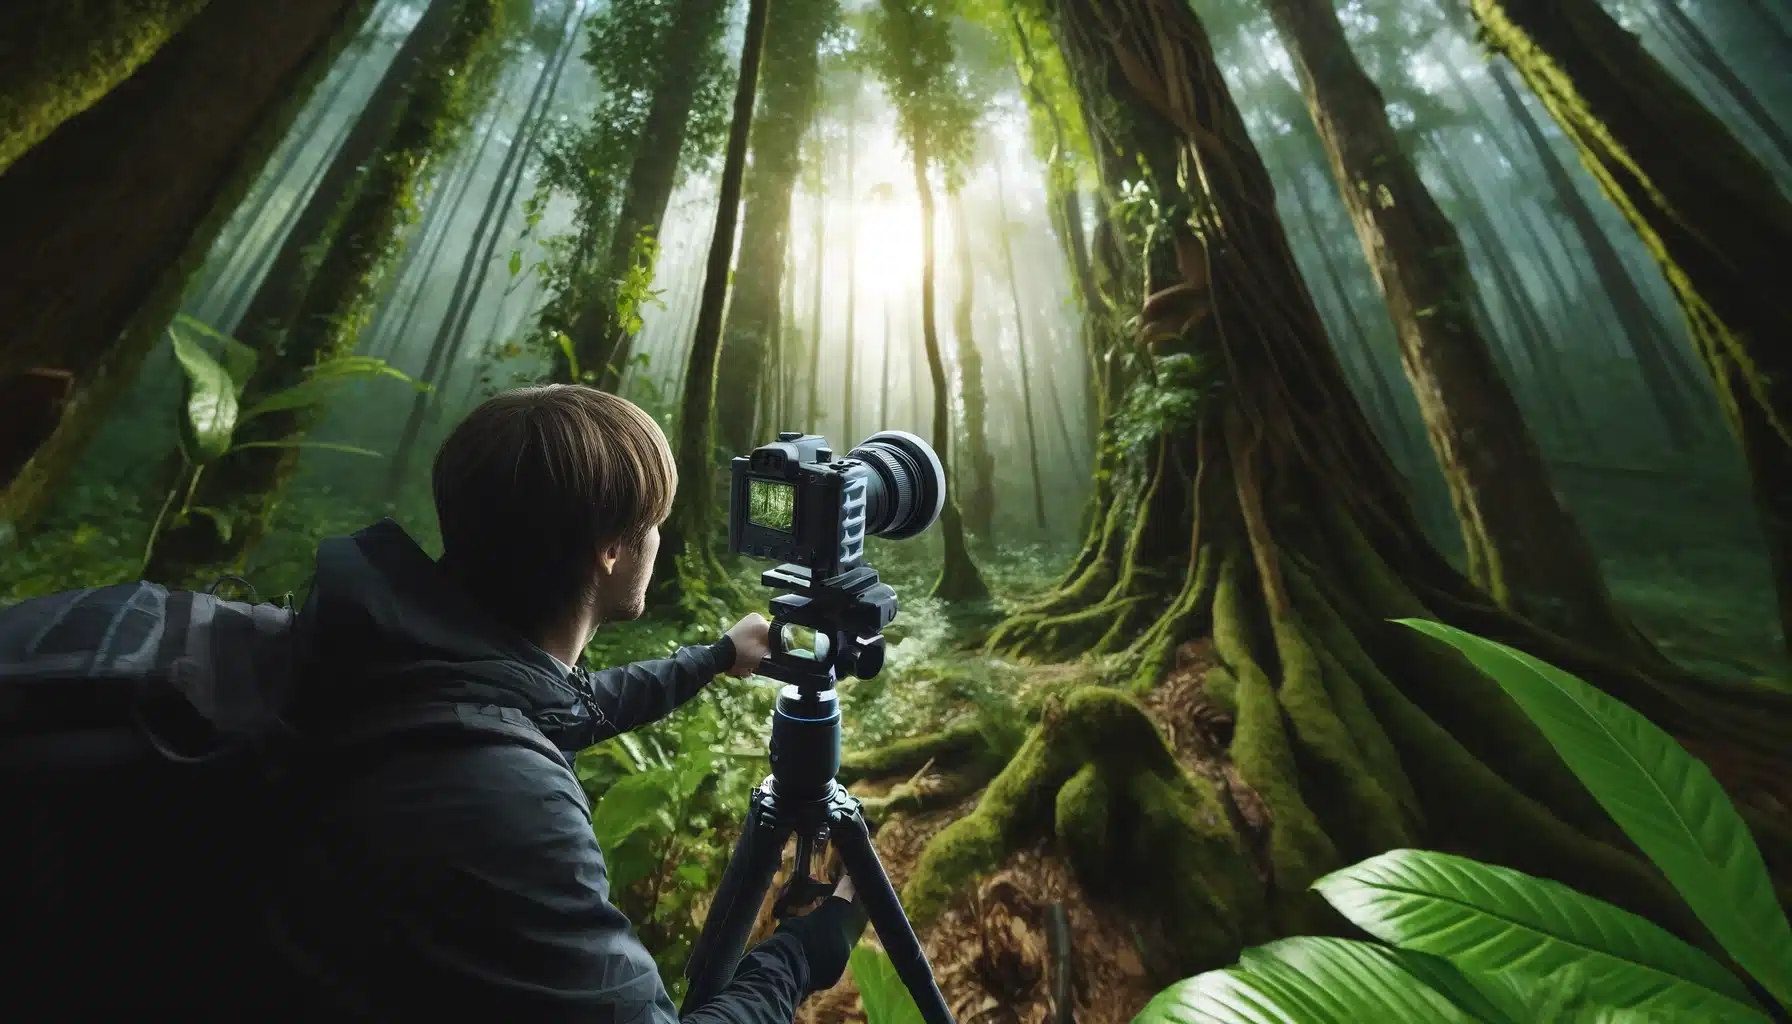 Photographer in a dense forest using a specialized cycloidal- camera on a tripod to capture the intricate details of the forest environment.